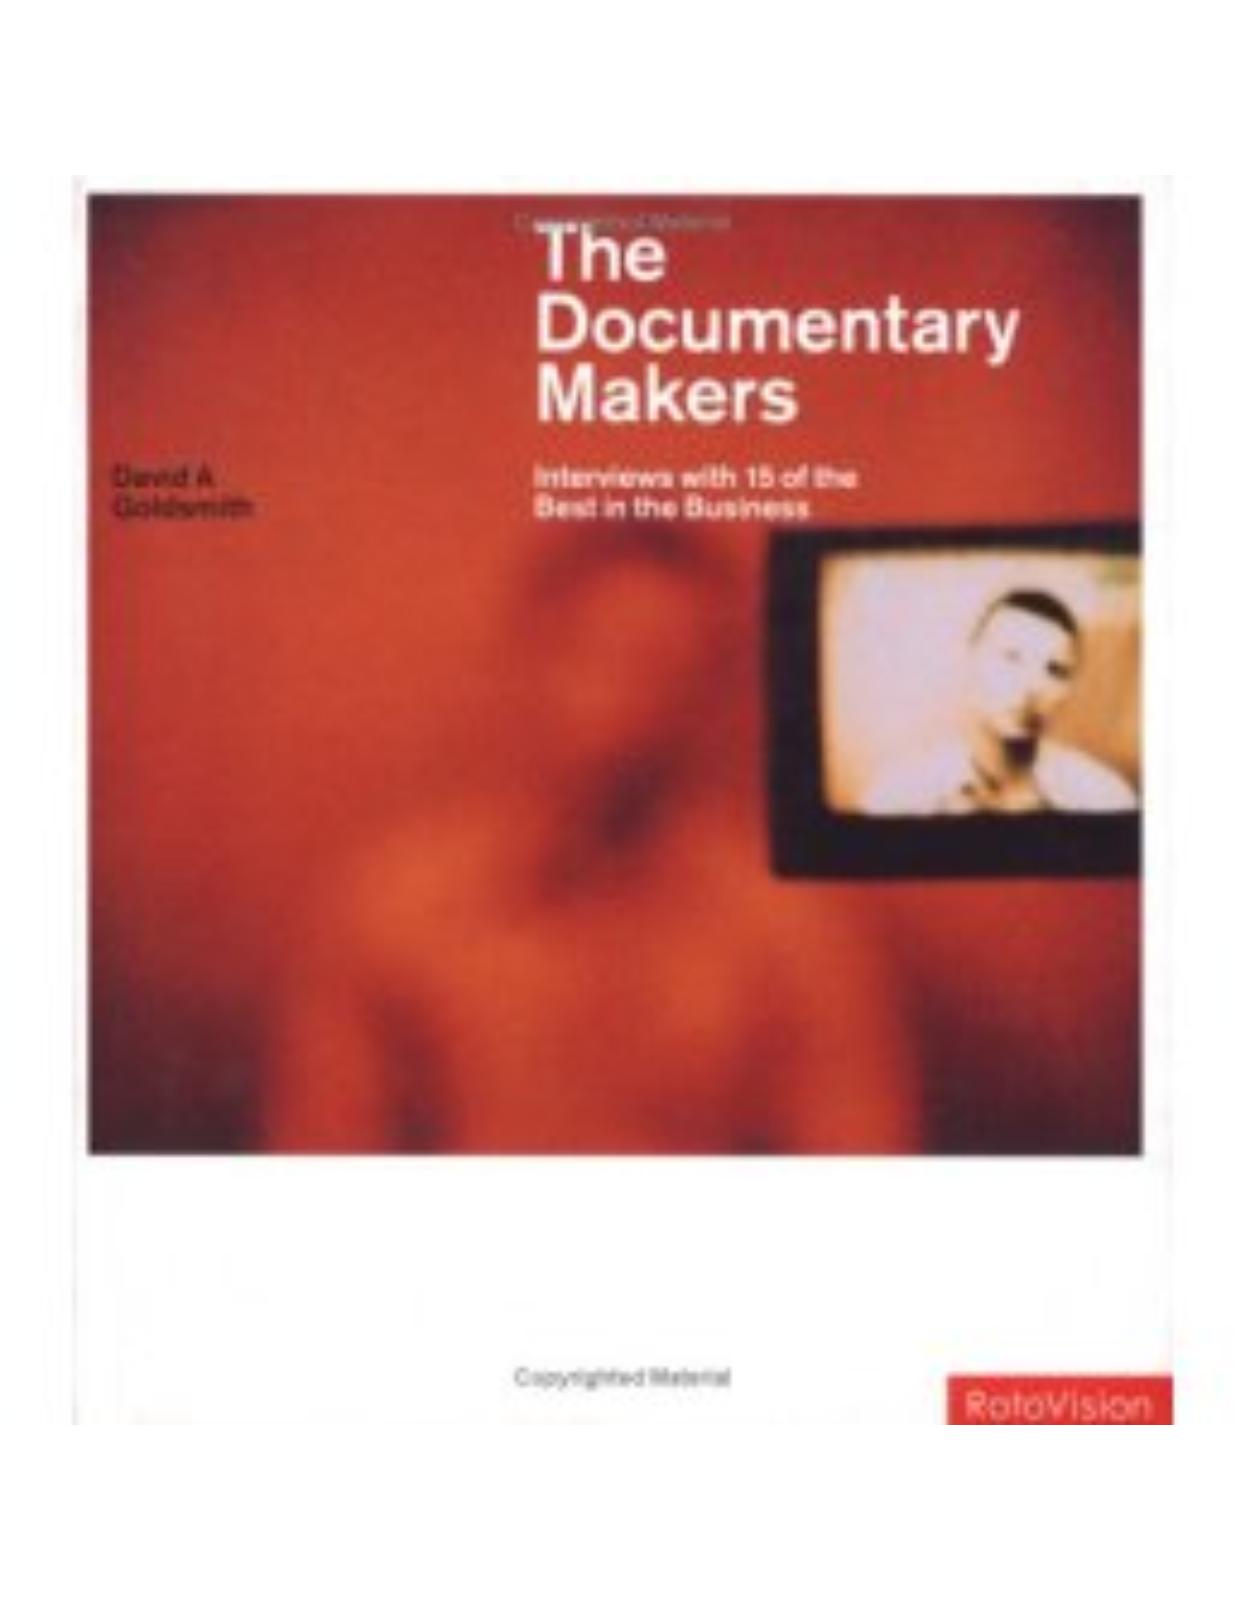 The Documentary Makers